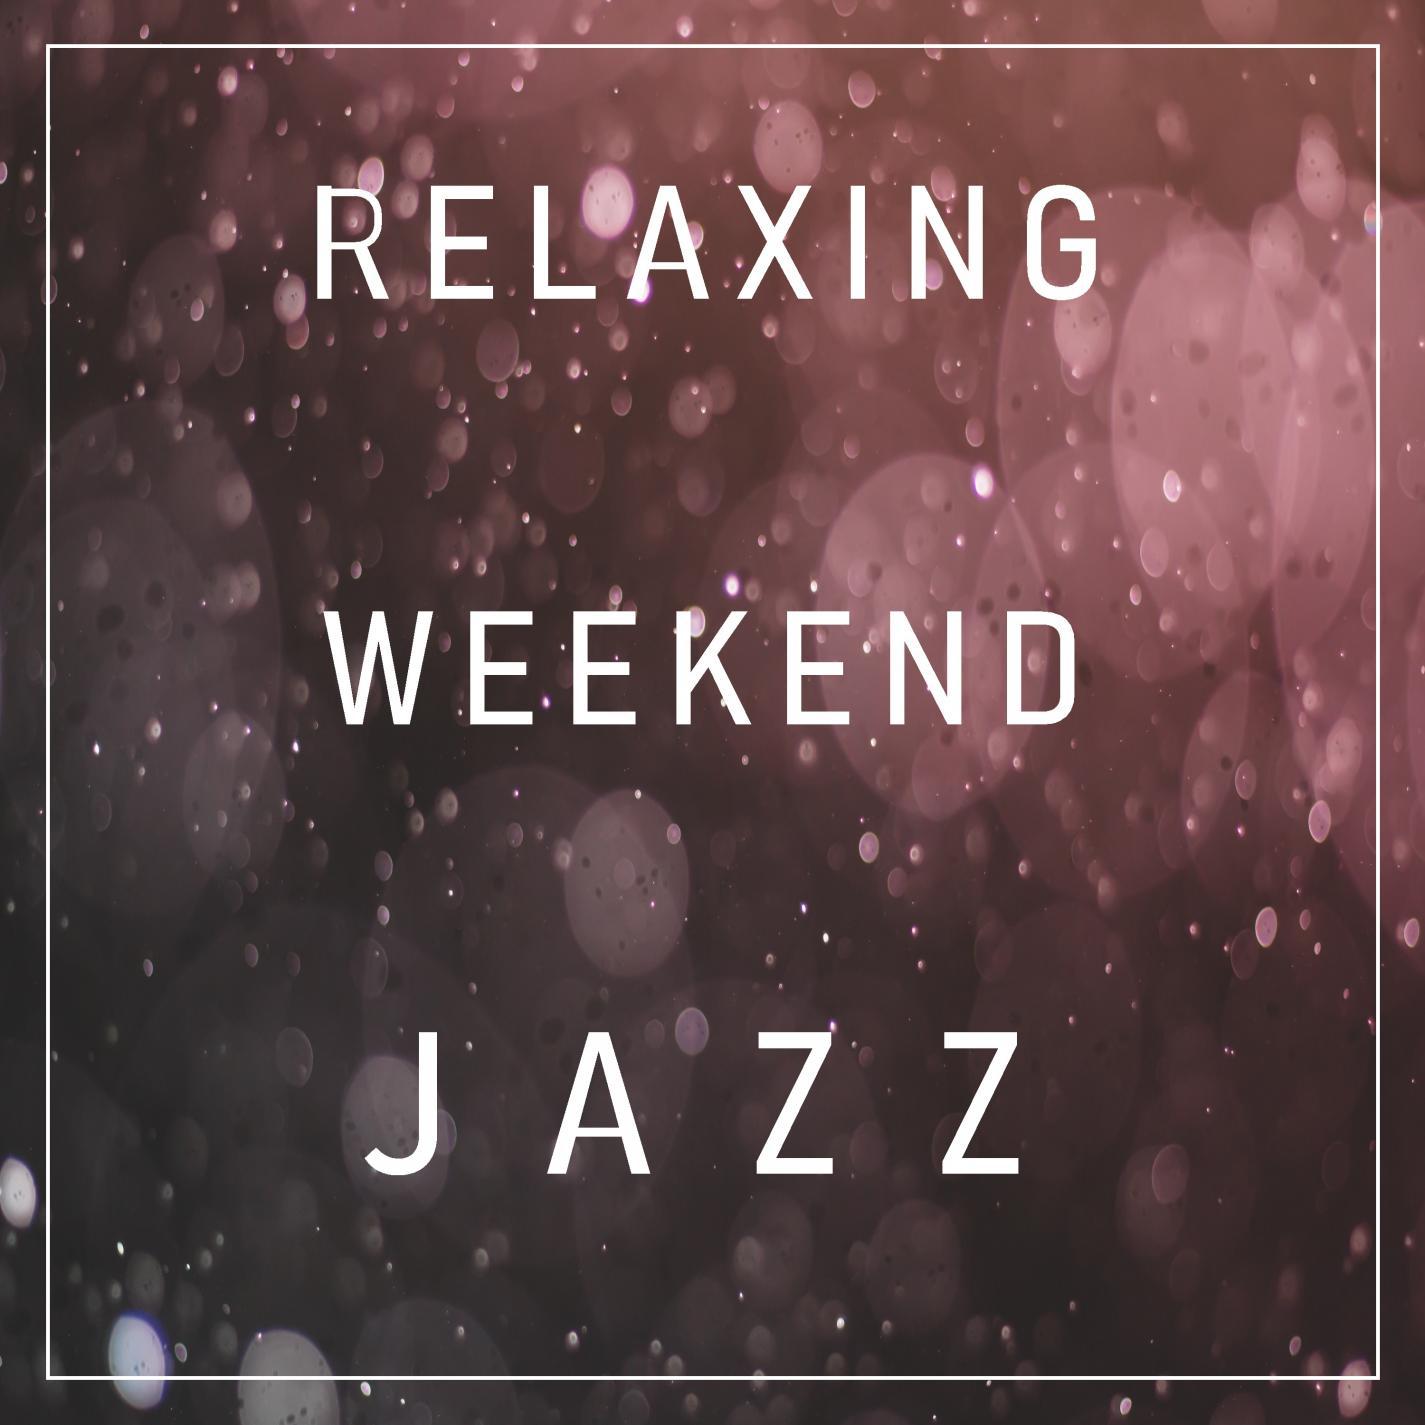 Smooth New Soothing Jazz Playlist for Calm Weekend Morning Relaxation